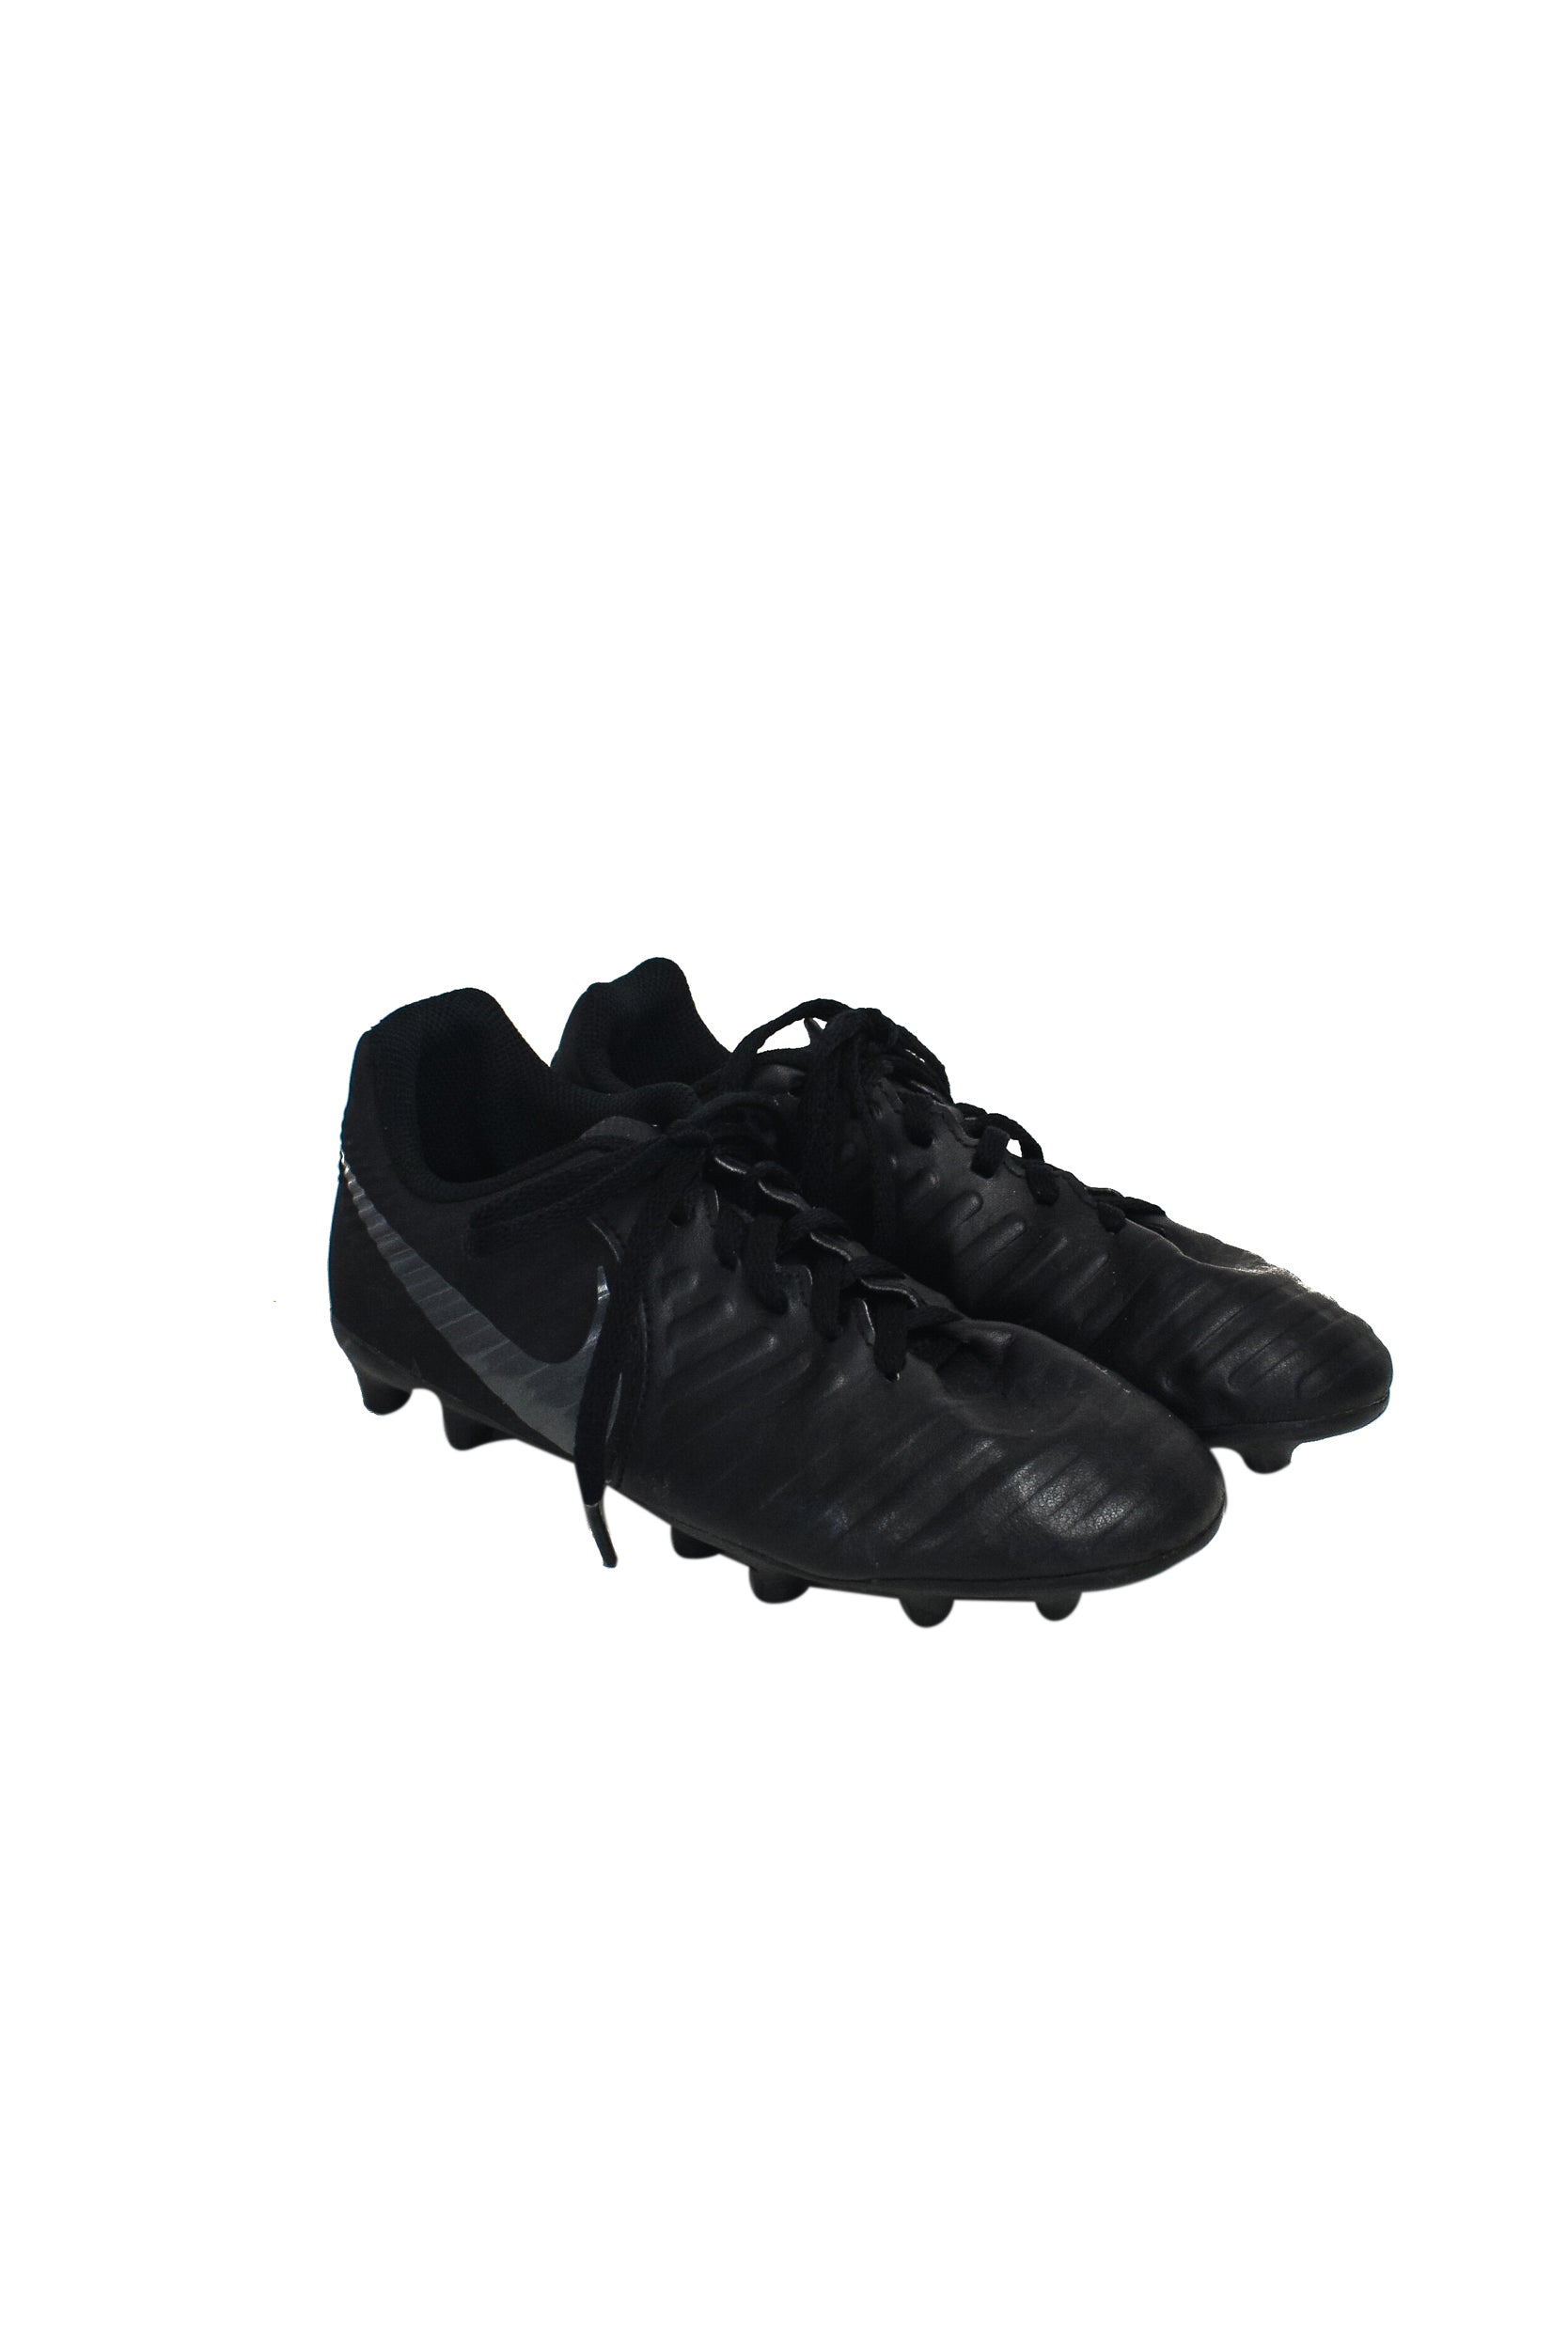 football shoes without spikes